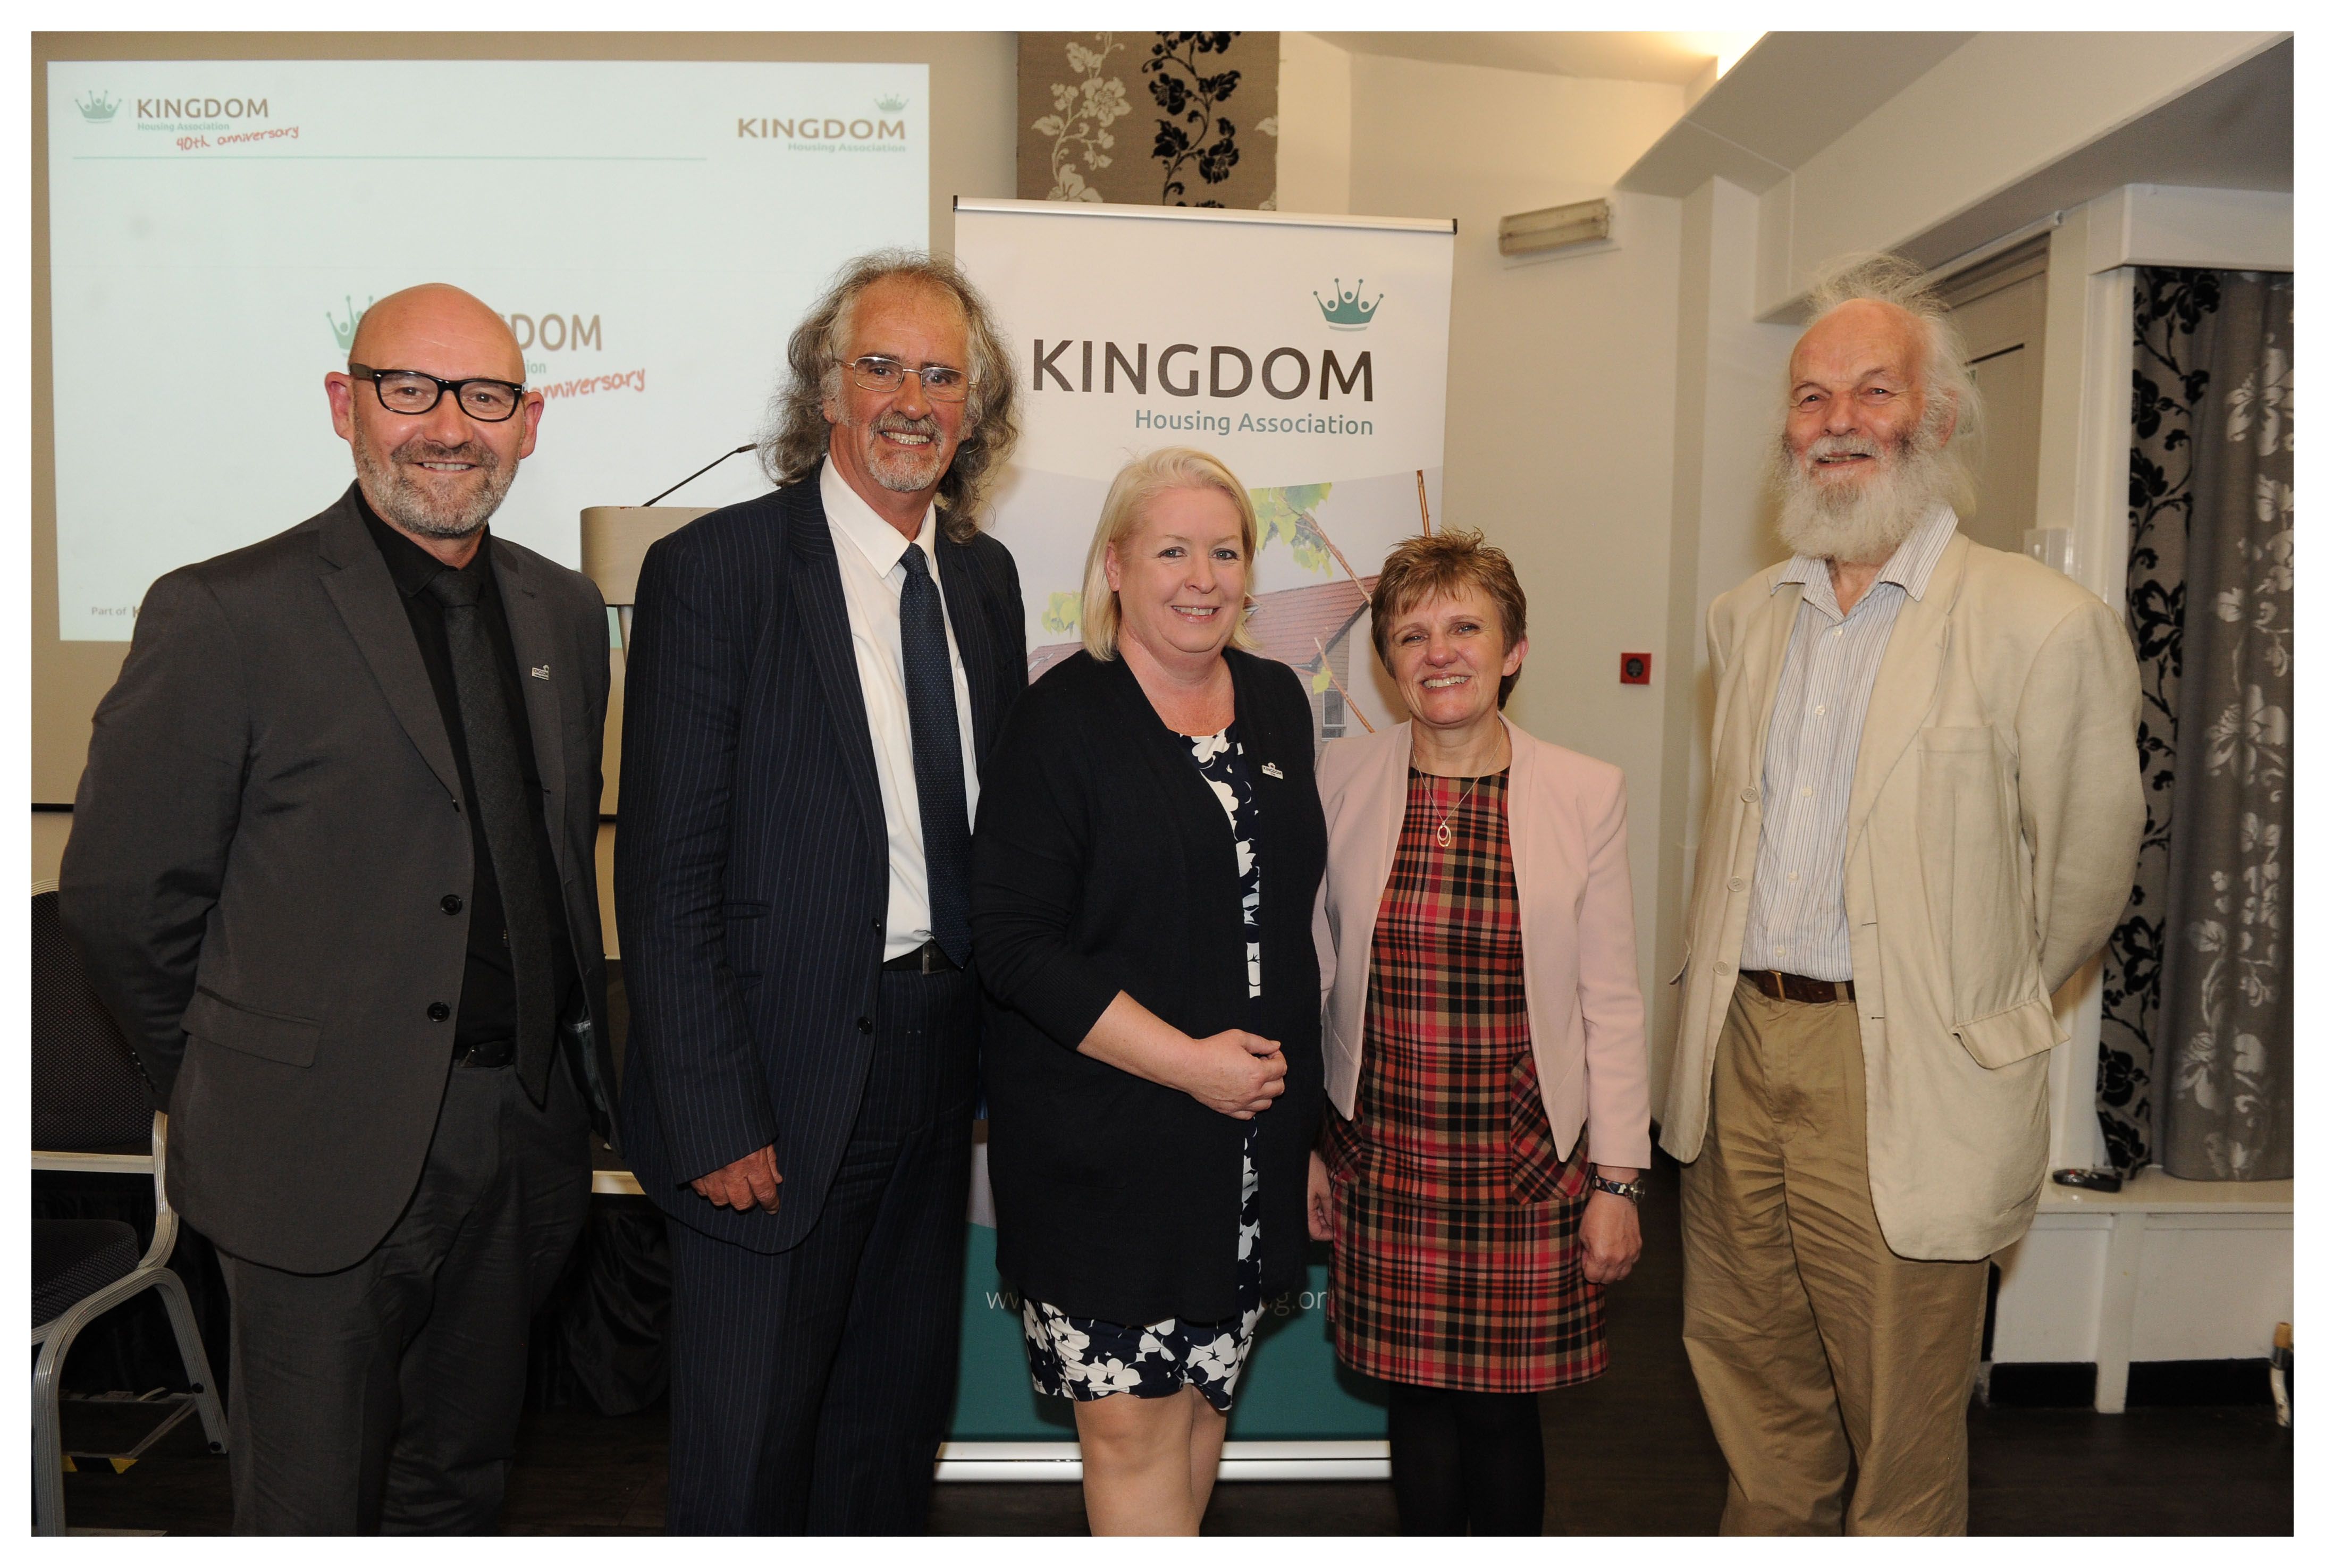 Celebrations and collaborations at Kingdom Housing Association's AGM